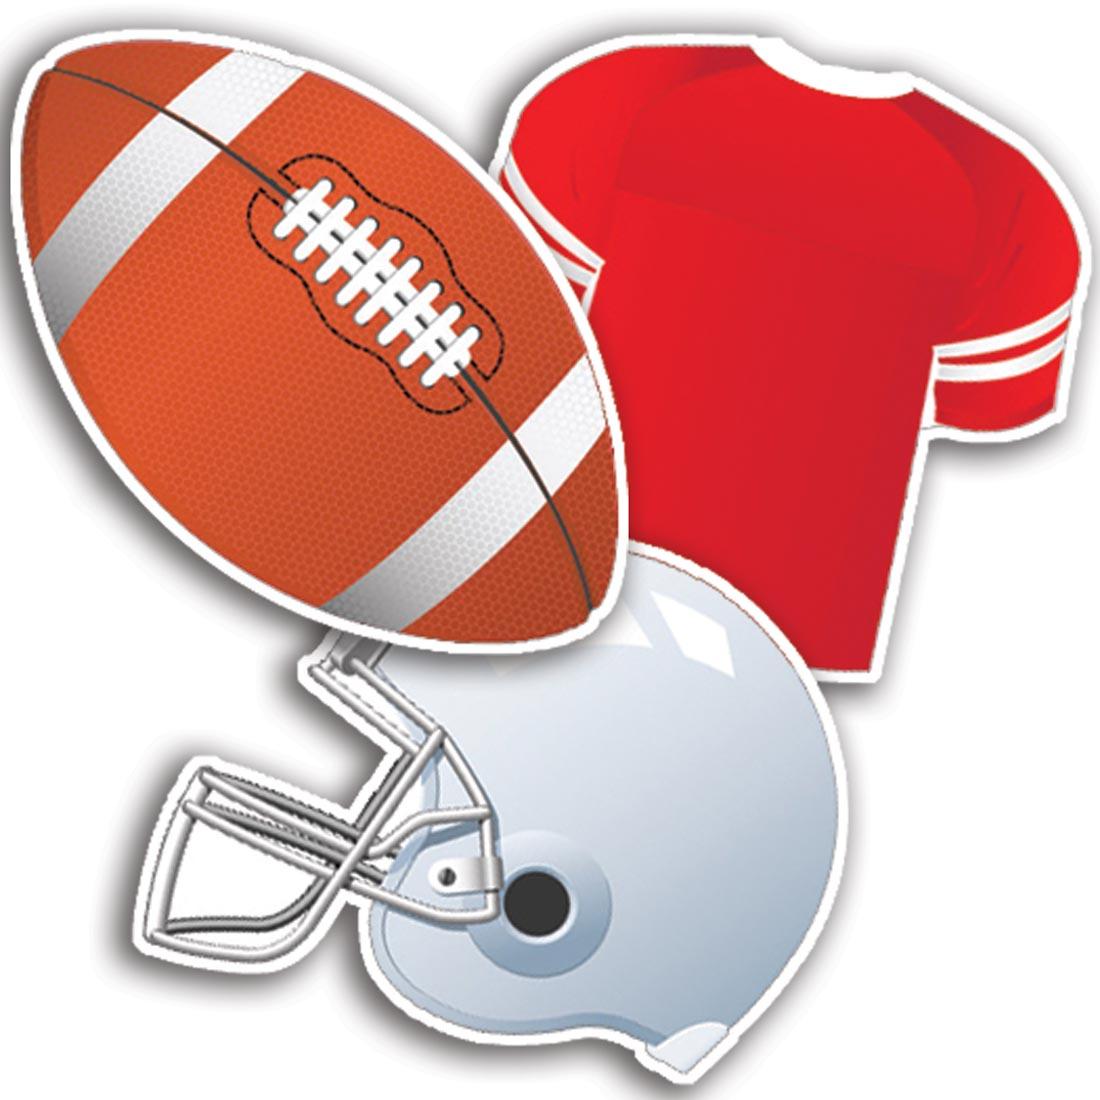 Assorted Paper Cut-Outs by Eureka have a Football, Jersey and Helmet